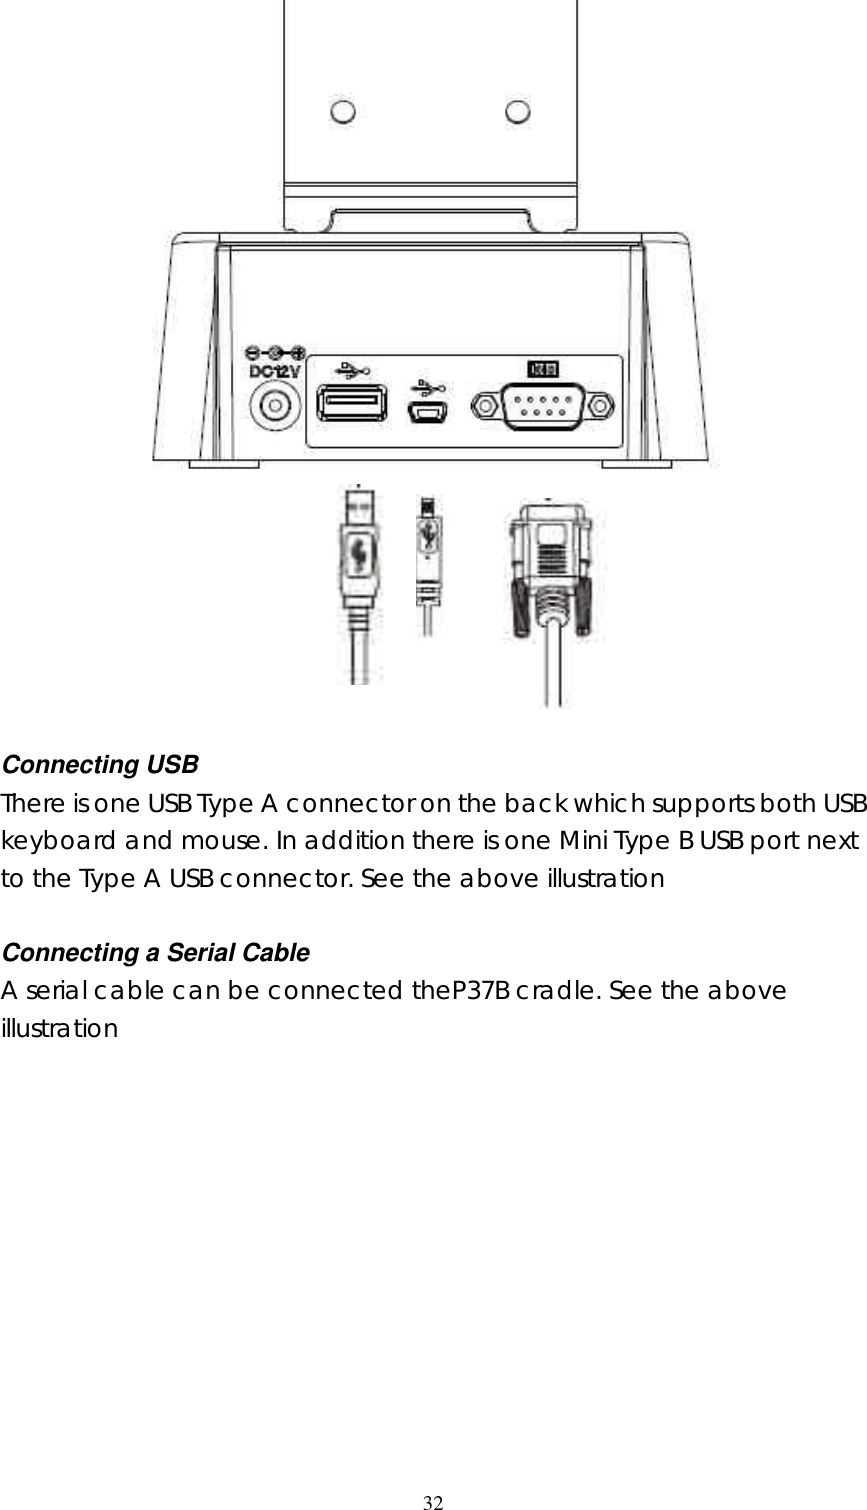  32        Connecting USB There is one USB Type A connector on the back which supports both USB keyboard and mouse. In addition there is one Mini Type B USB port next to the Type A USB connector. See the above illustration  Connecting a Serial Cable A serial cable can be connected theP37B cradle. See the above illustration                 